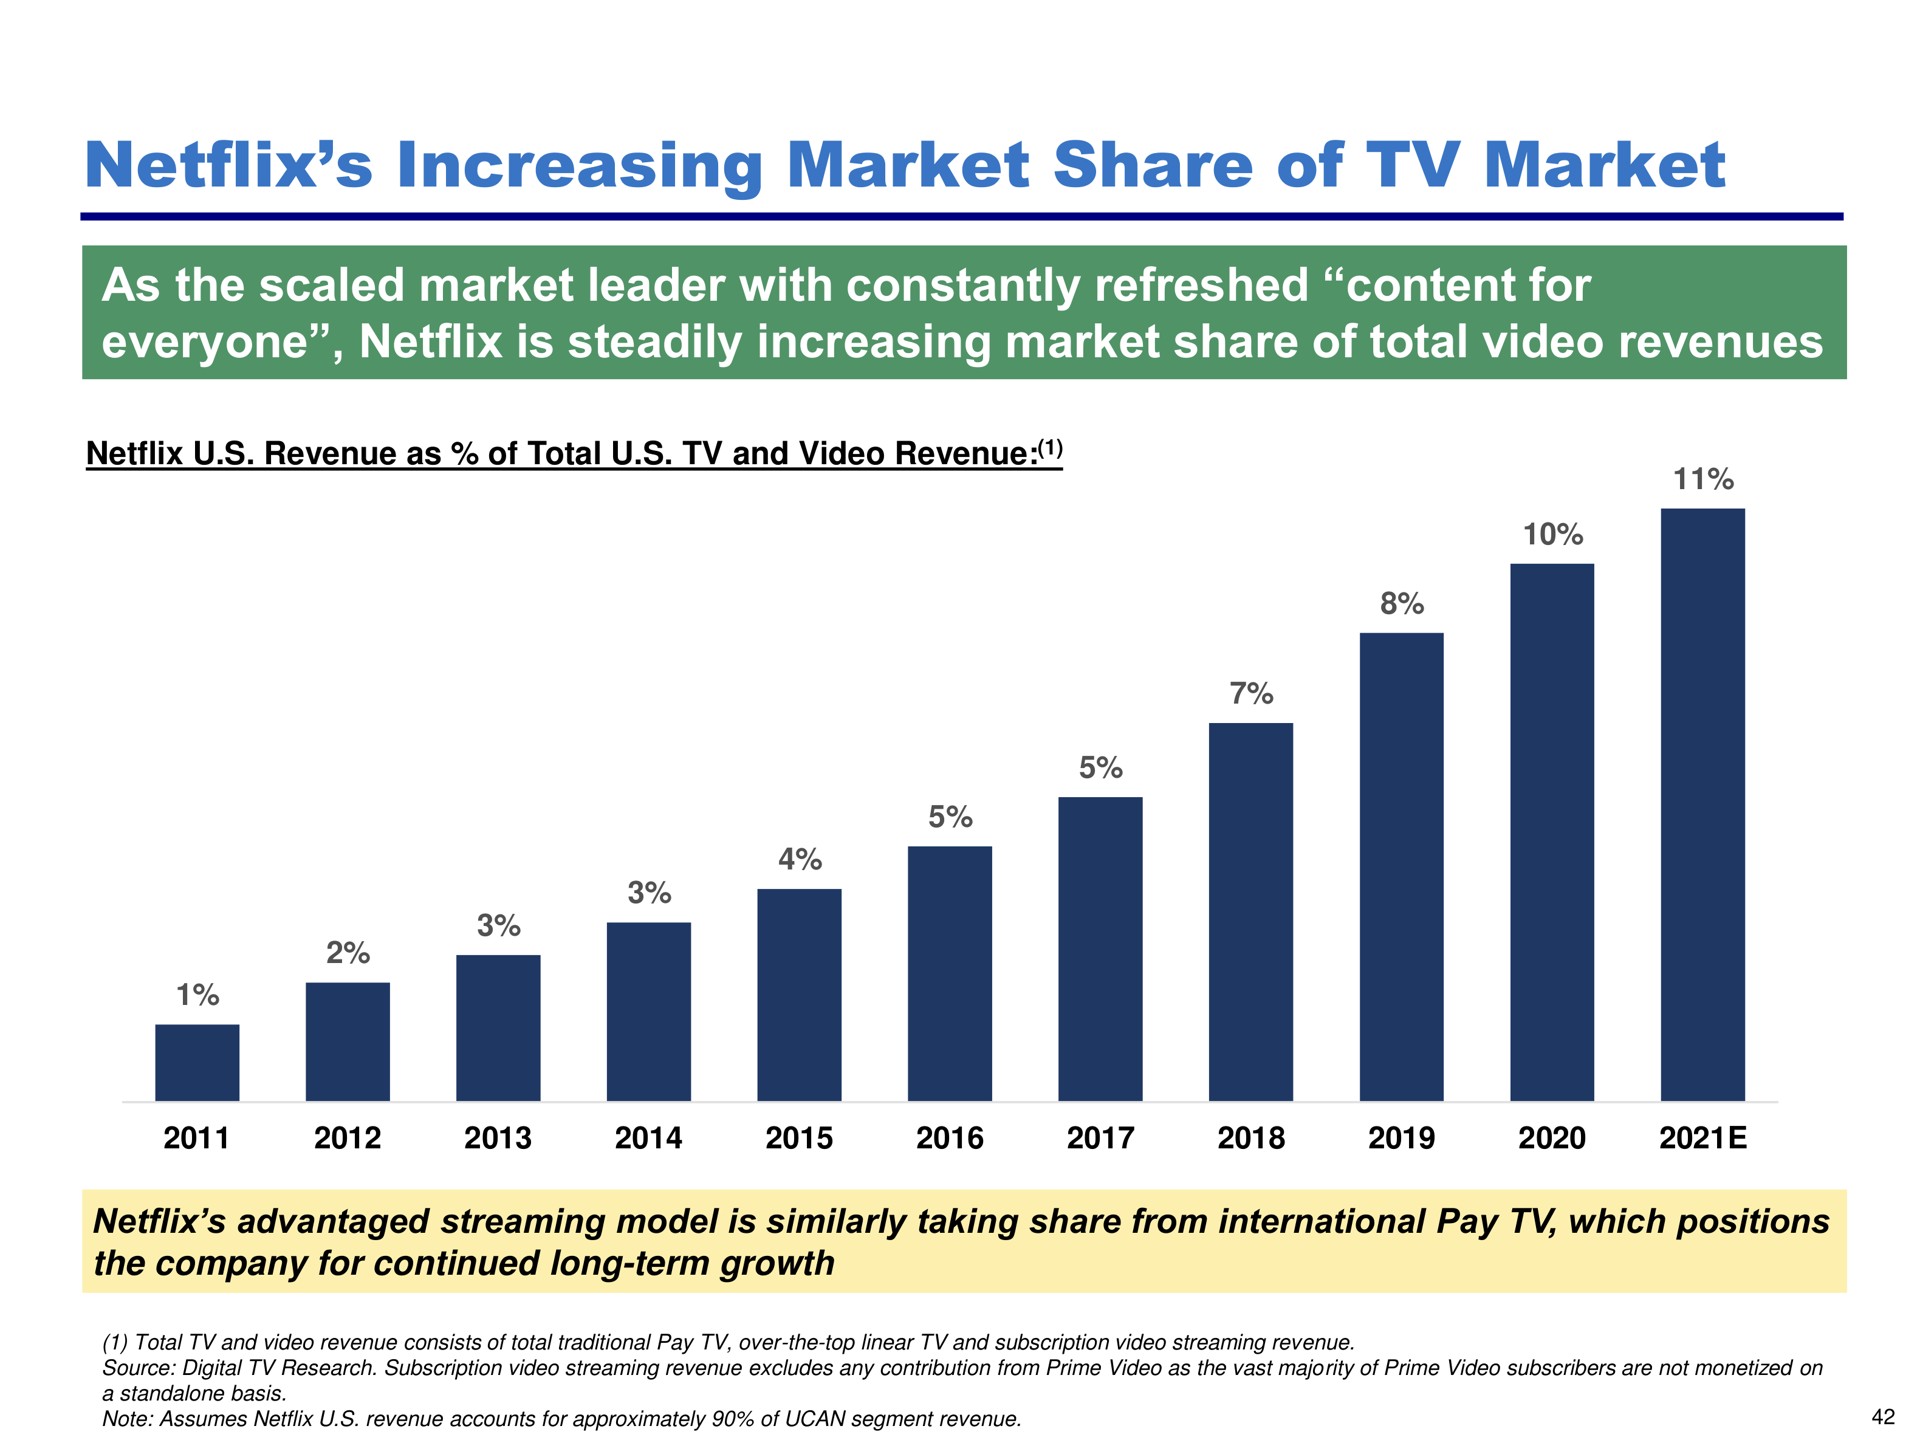 increasing market share of market as the scaled market leader with constantly refreshed content for everyone is steadily increasing market share of total video revenues | Pershing Square